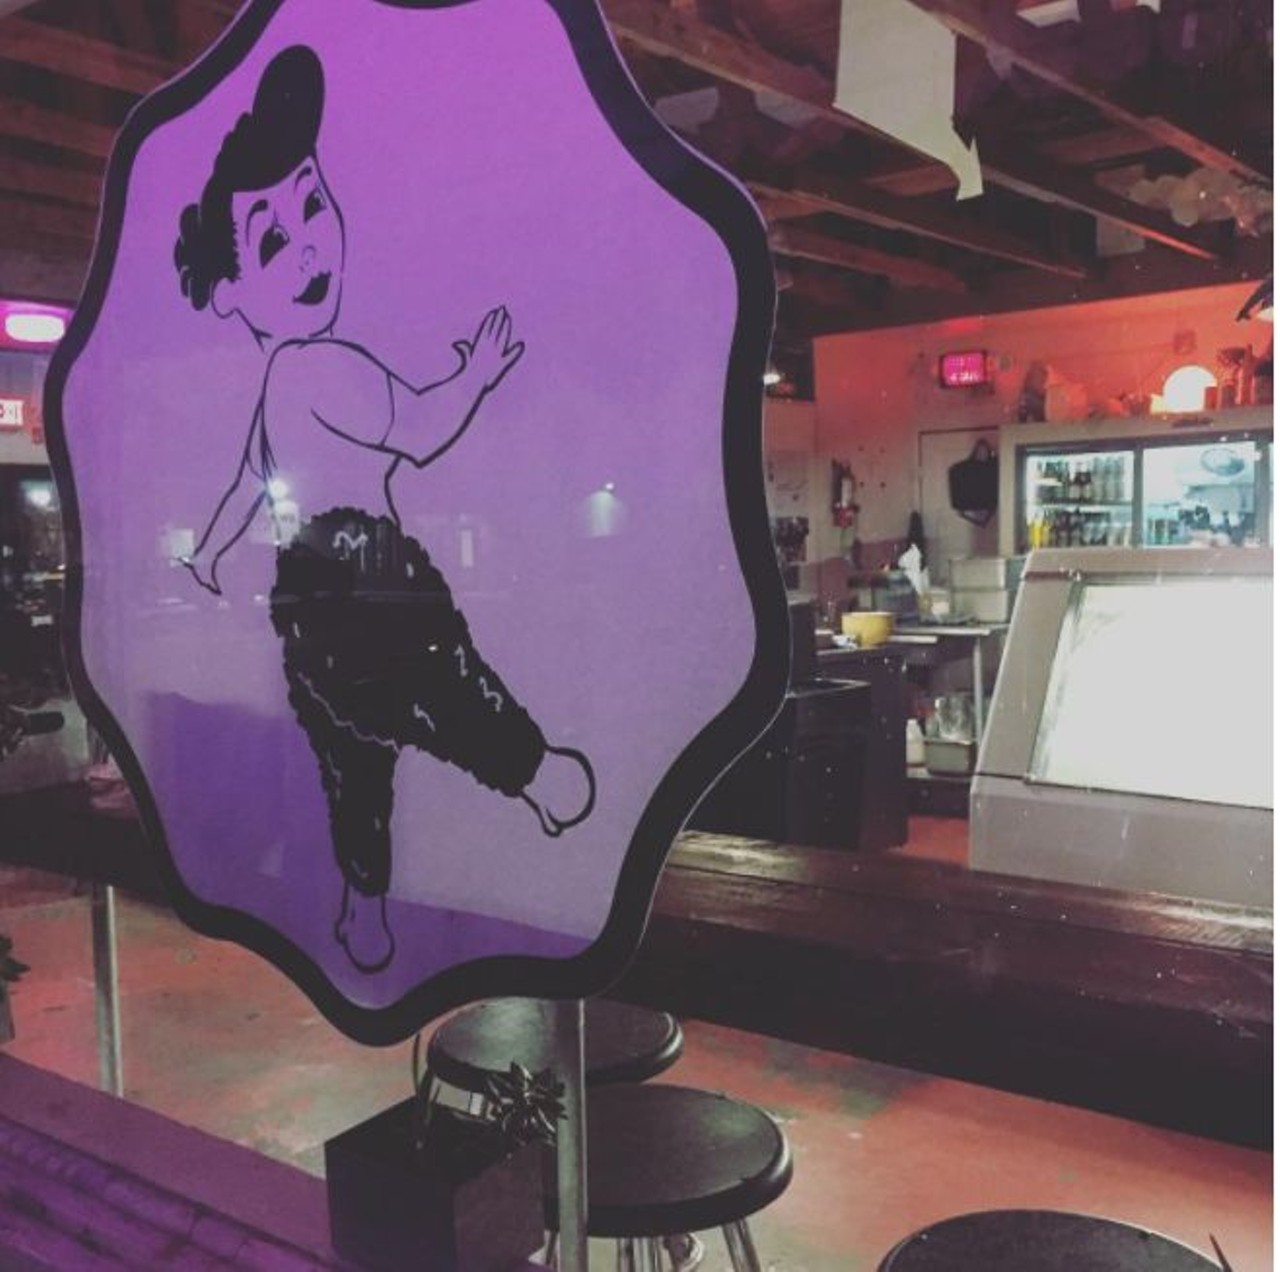 Cullum&#146;s Attagirl Ice House
726 E. Mistletoe Ave., (210) 437-4263, facebook.com/cullumsattagirl
The taps rotate frequently at this chicken shack known for its Southern fried wings and fried bologna and pimento sandwiches. 
Photo via Instagram, lindsaydoodler